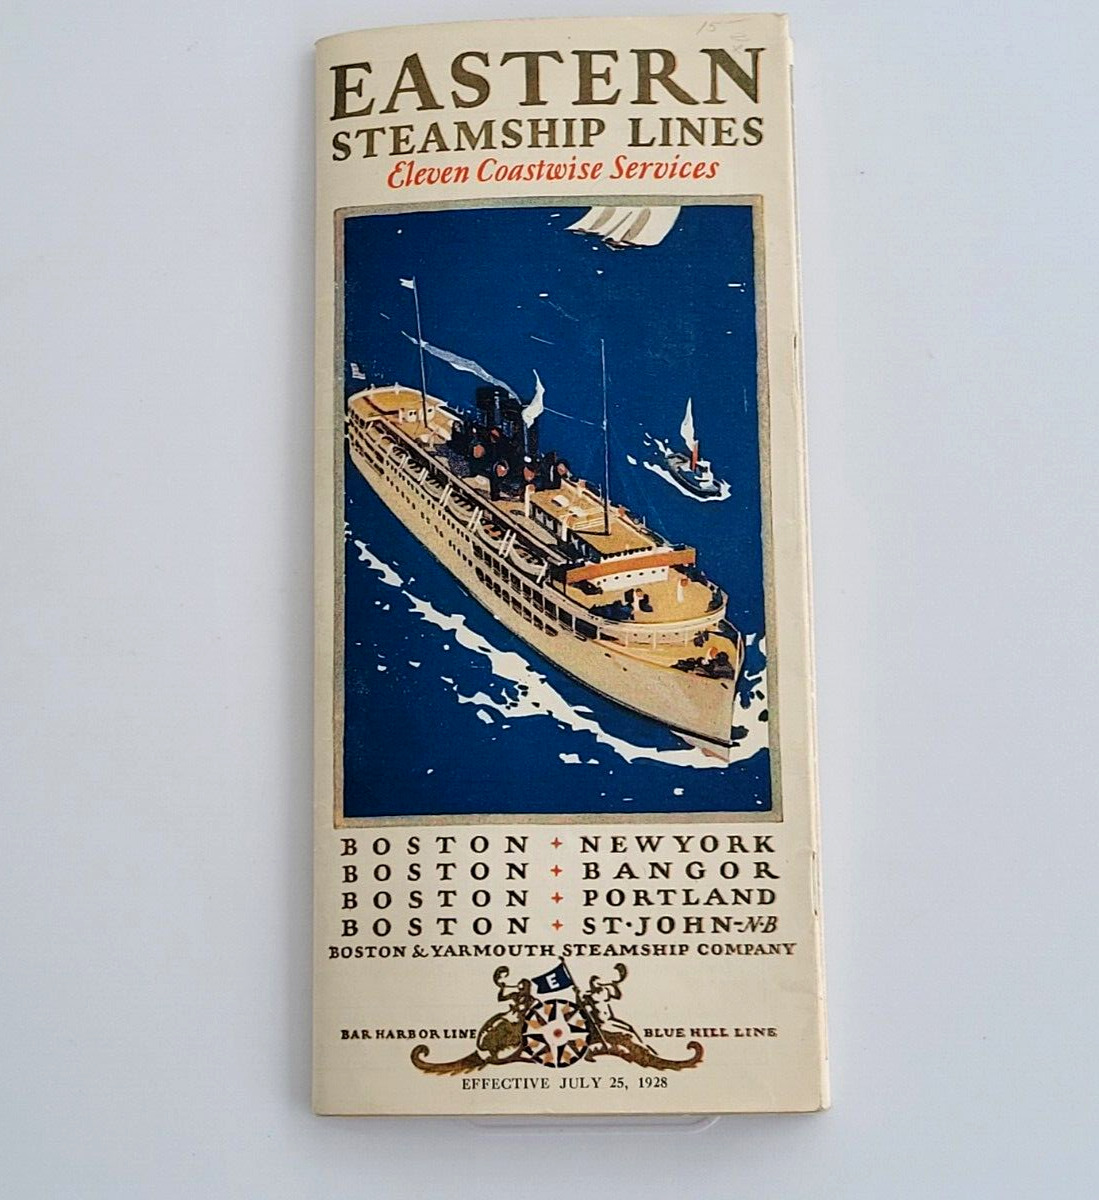 VINTAGE c 1928 EASTERN STEAMSHIP LINES 31-PAGE FOLD OUT ADVERTISING BROCHURE VG+